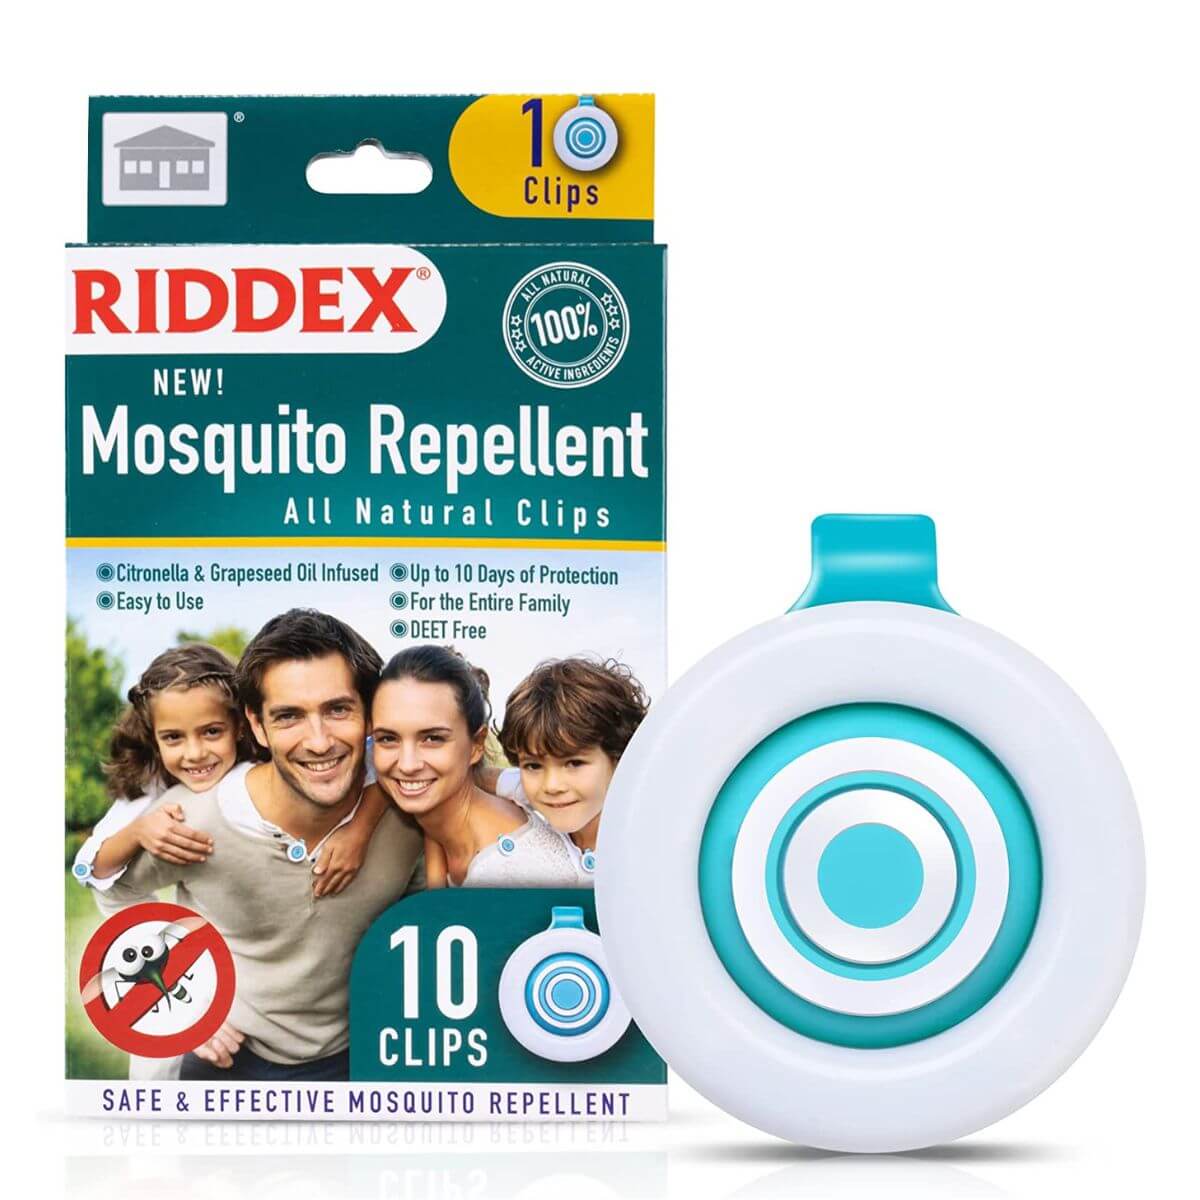 Riddex Mosquito Repellent - 10 Clips photo of box and a clip